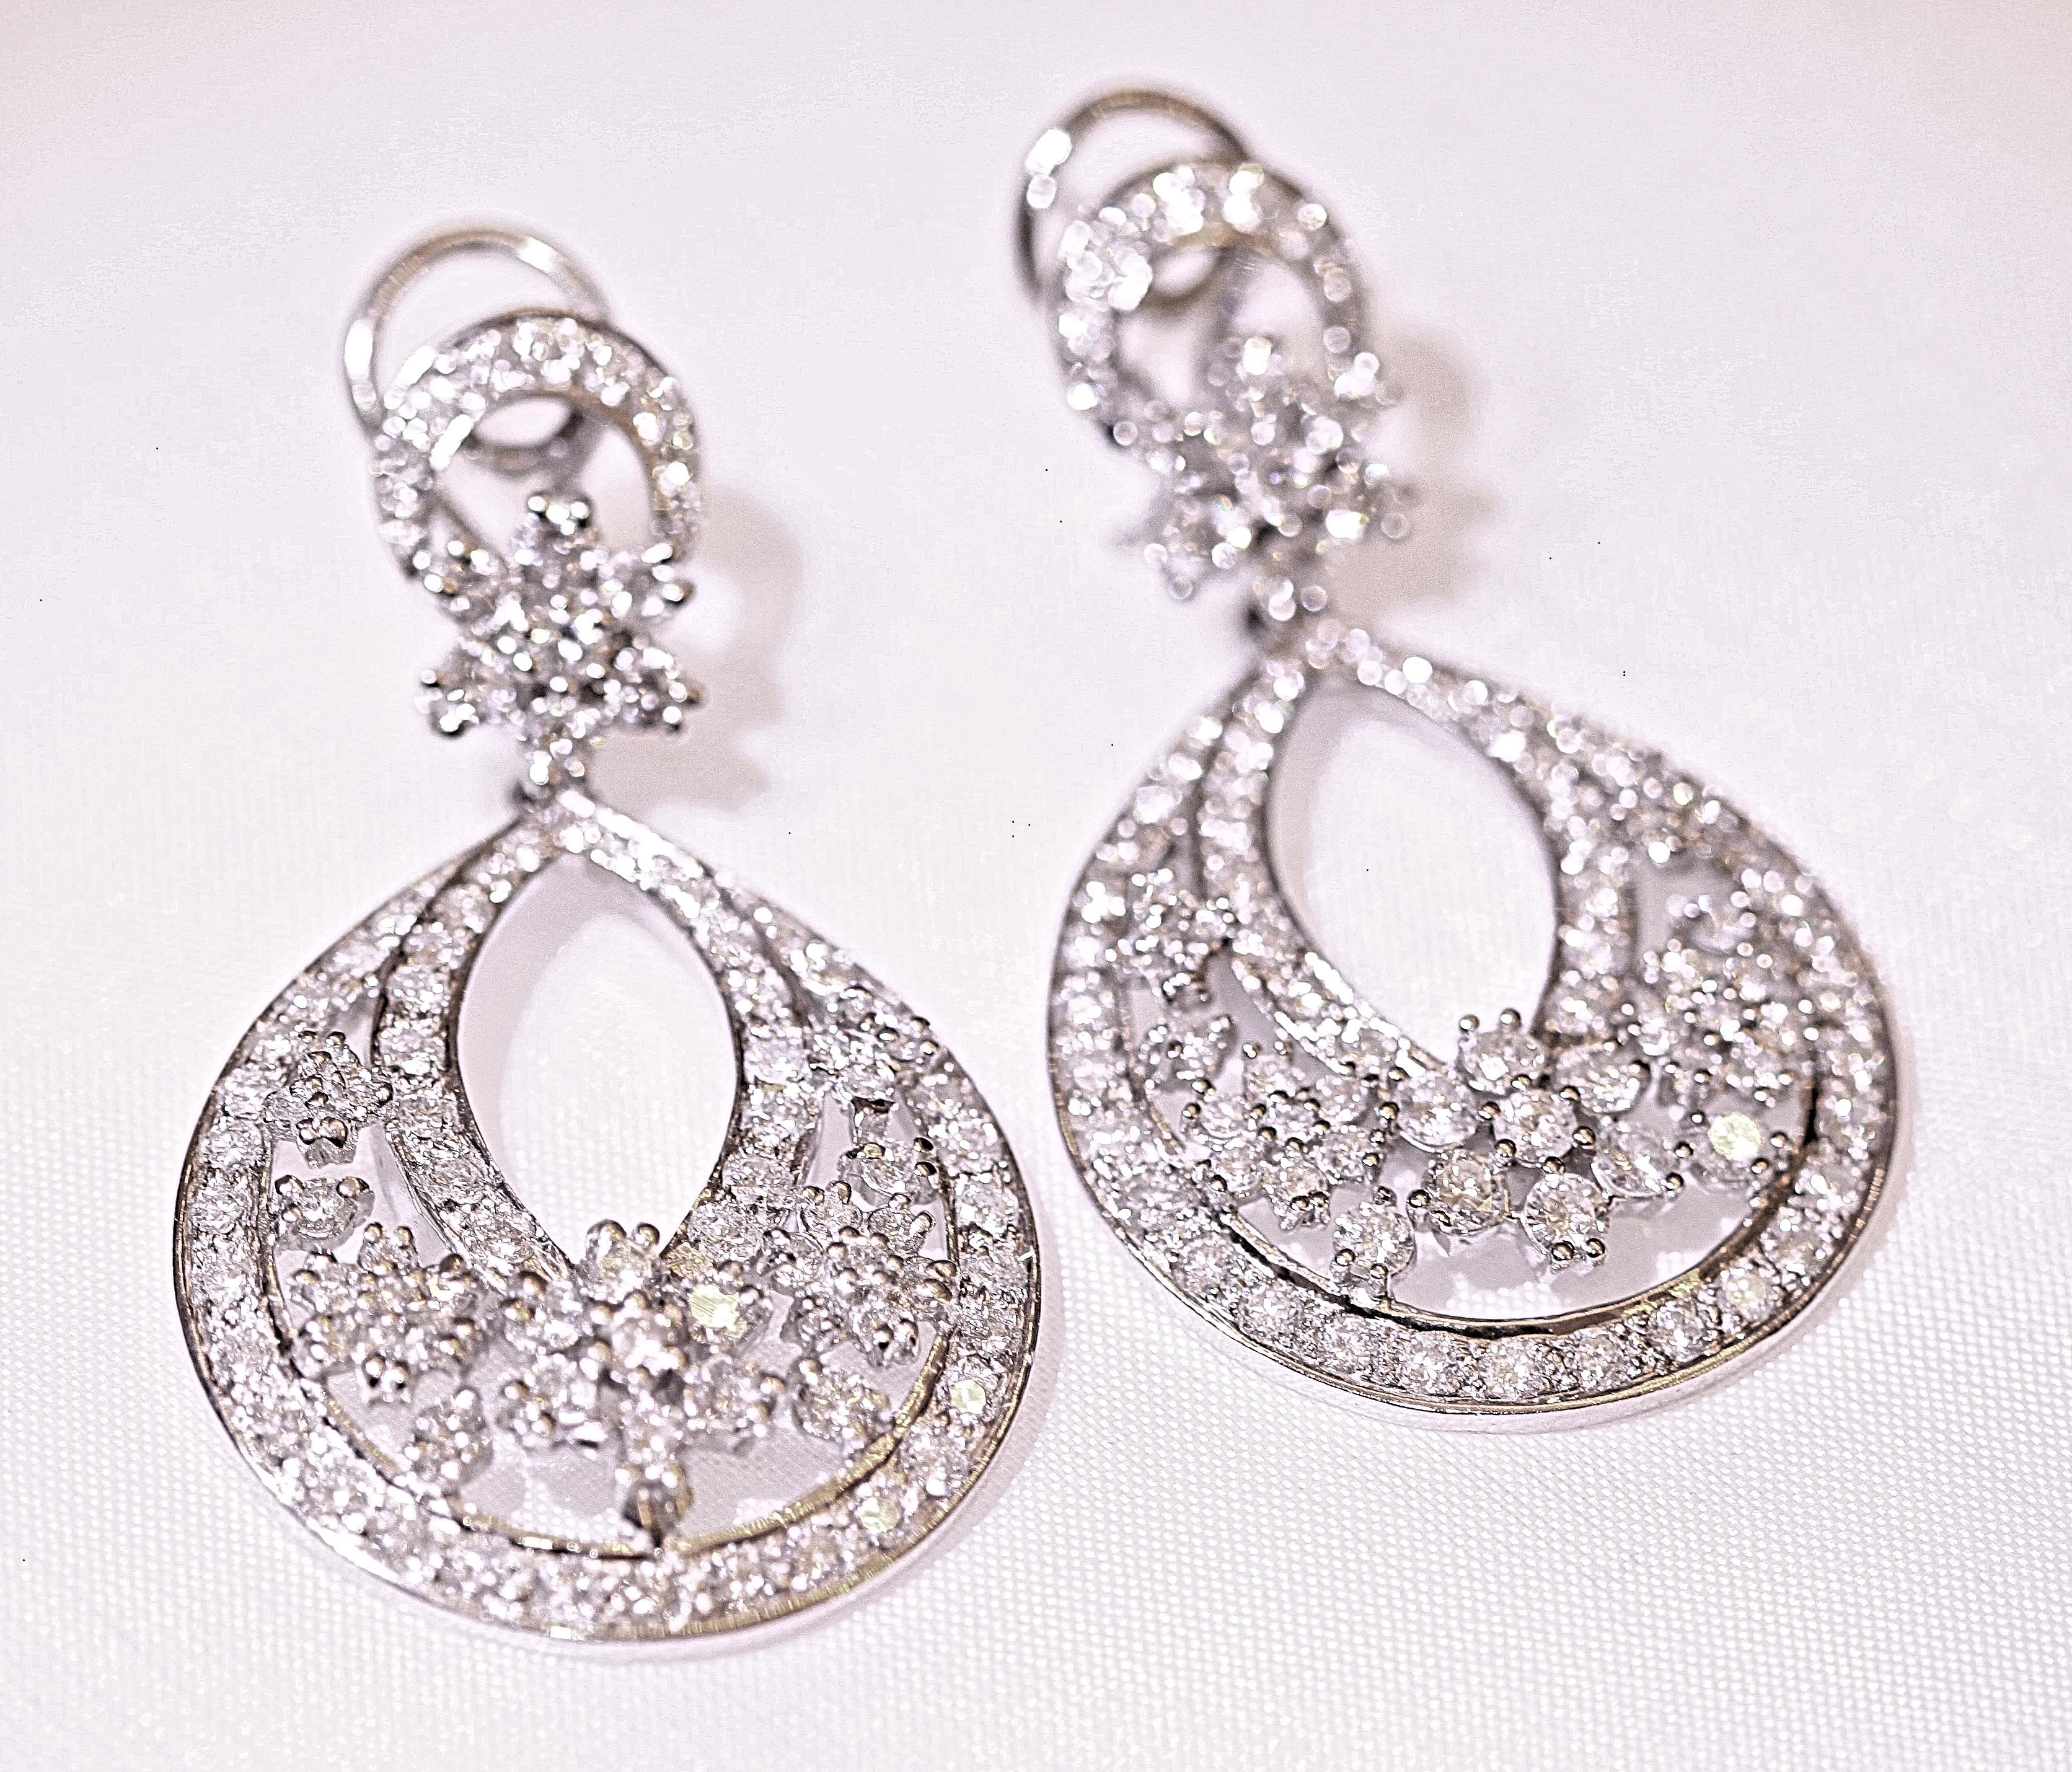 These dazzling chandelier earrings consists of an approximate 8.50 carats total weight of round brilliant cut diamonds.  The diamonds are white in color and VS-I in clarity.  The earrings measure 2 inches long and 1 1/8 inches wide.  The earrings